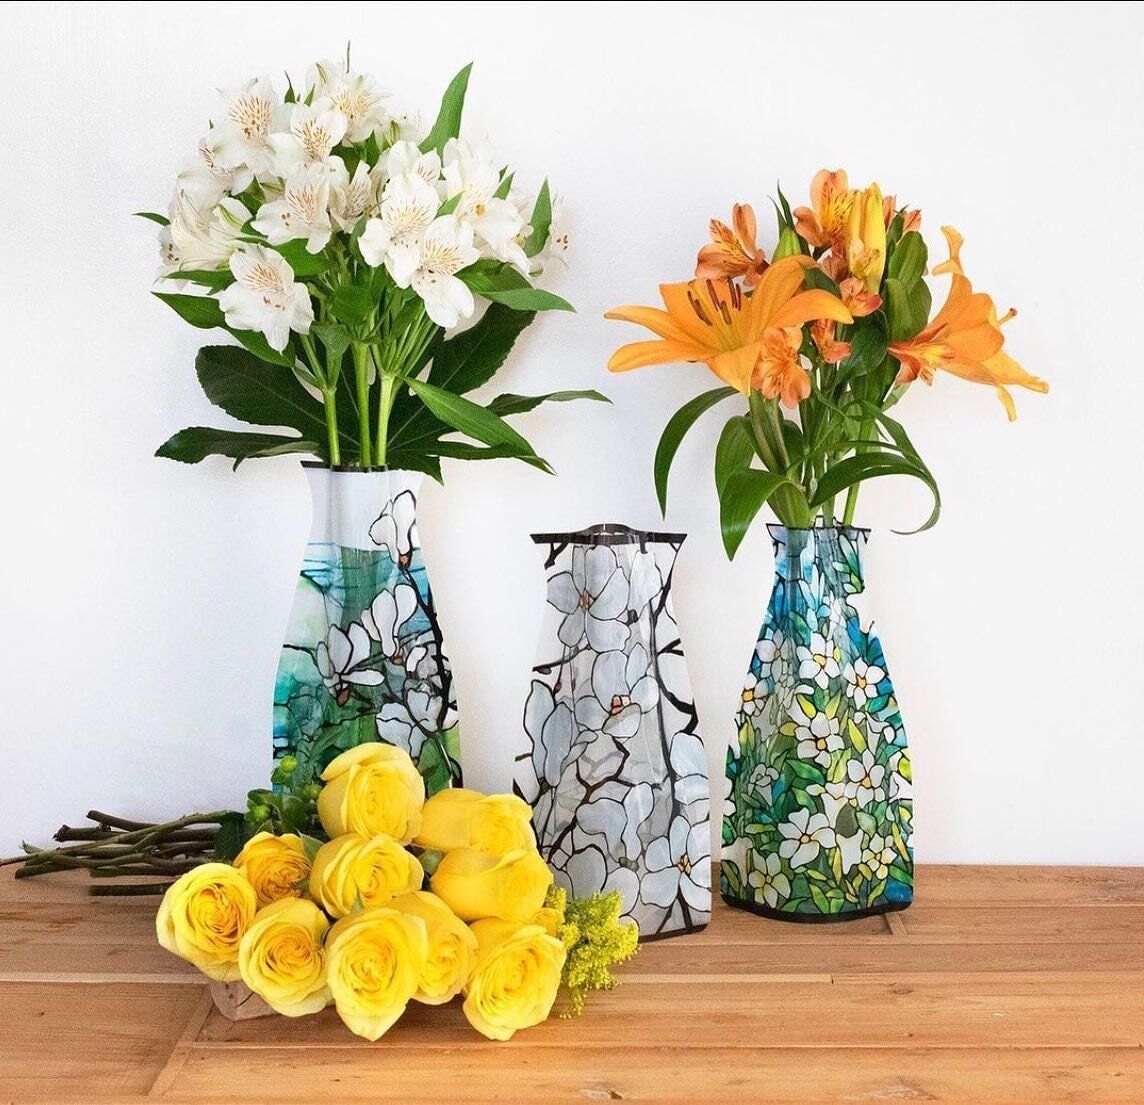 Looking for a unique gift&mdash;that is useful and fun? These vases are perfect for someone who loves flowers and art ✨

Happy Weekend 🌼

#perSimmons #localgiftshop #norwellma #artinspiredvases #flowervases